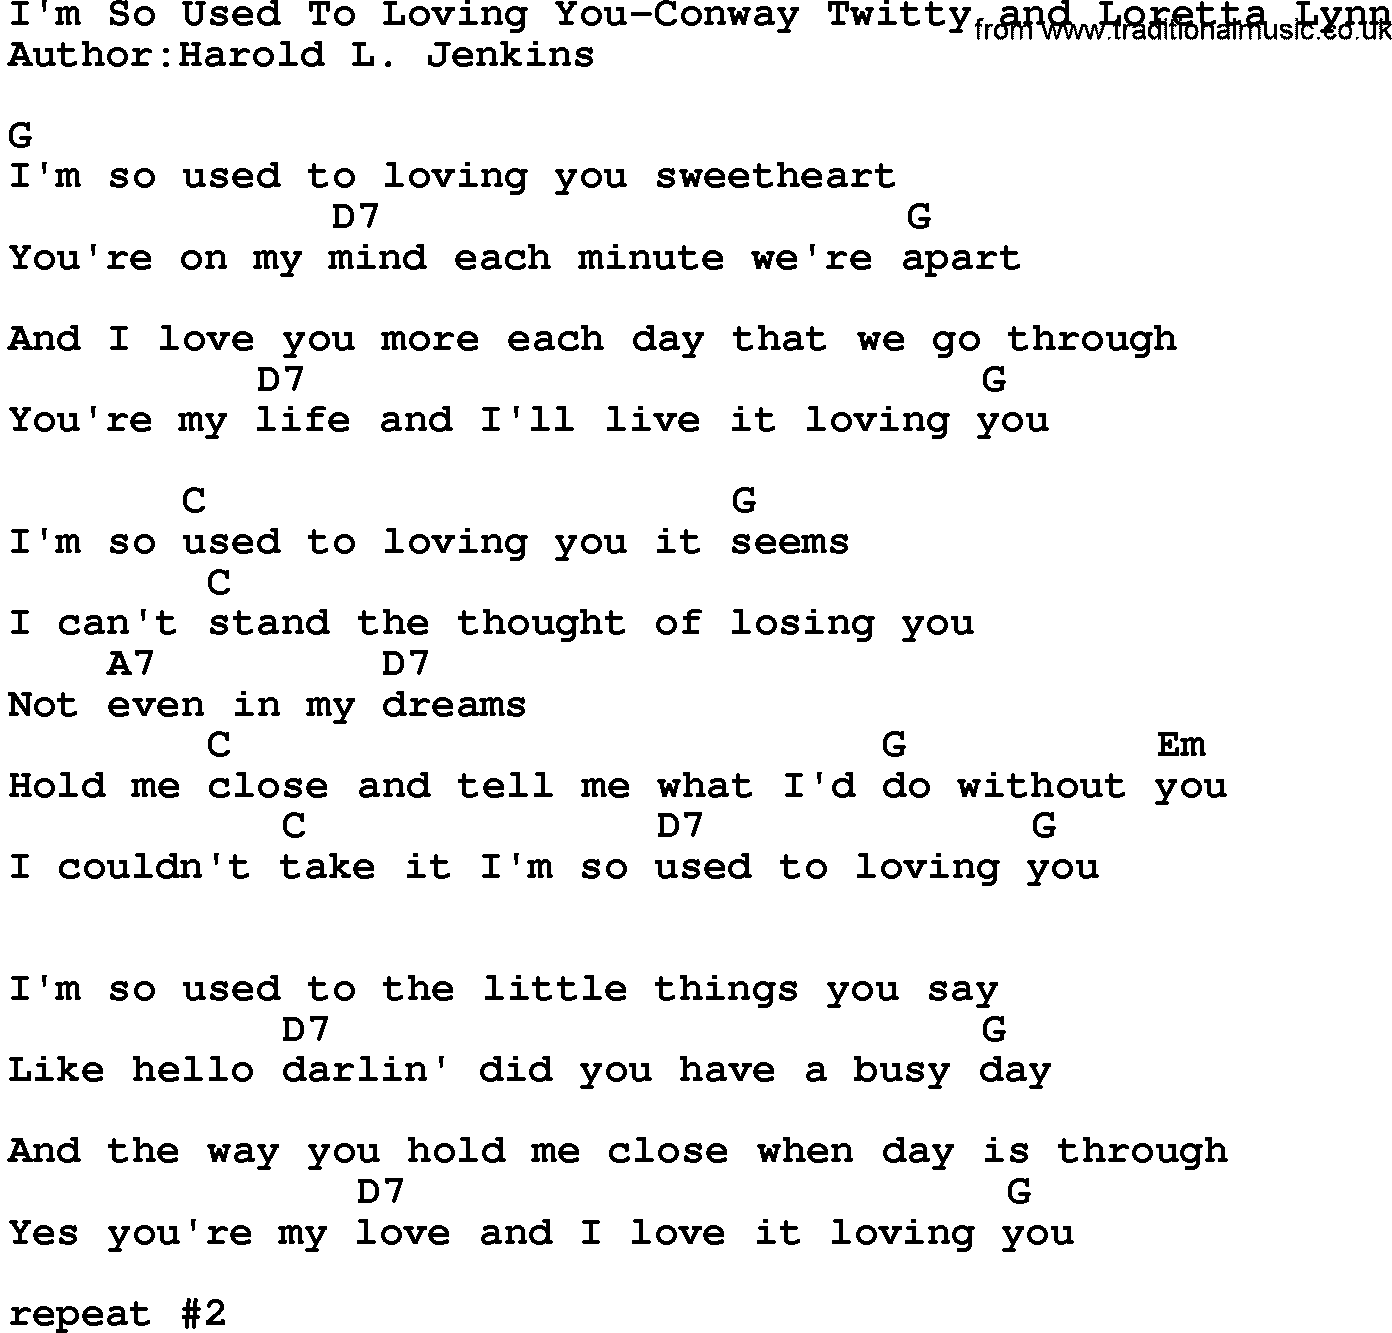 Country music song: I'm So Used To Loving You-Conway Twitty And Loretta Lynn lyrics and chords